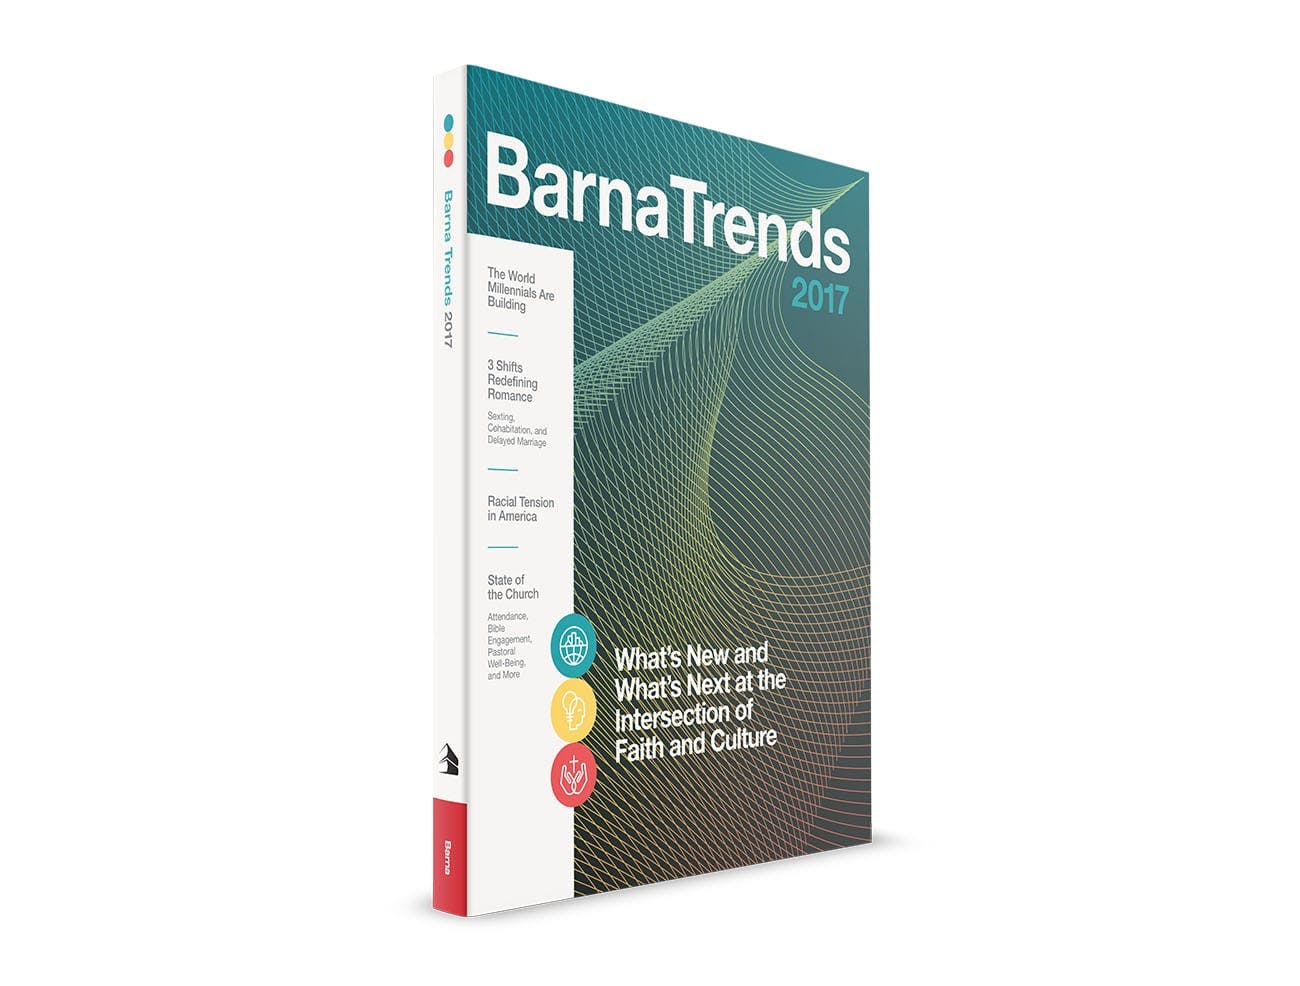 Barna Trends What’s New and What’s Next Barna Group